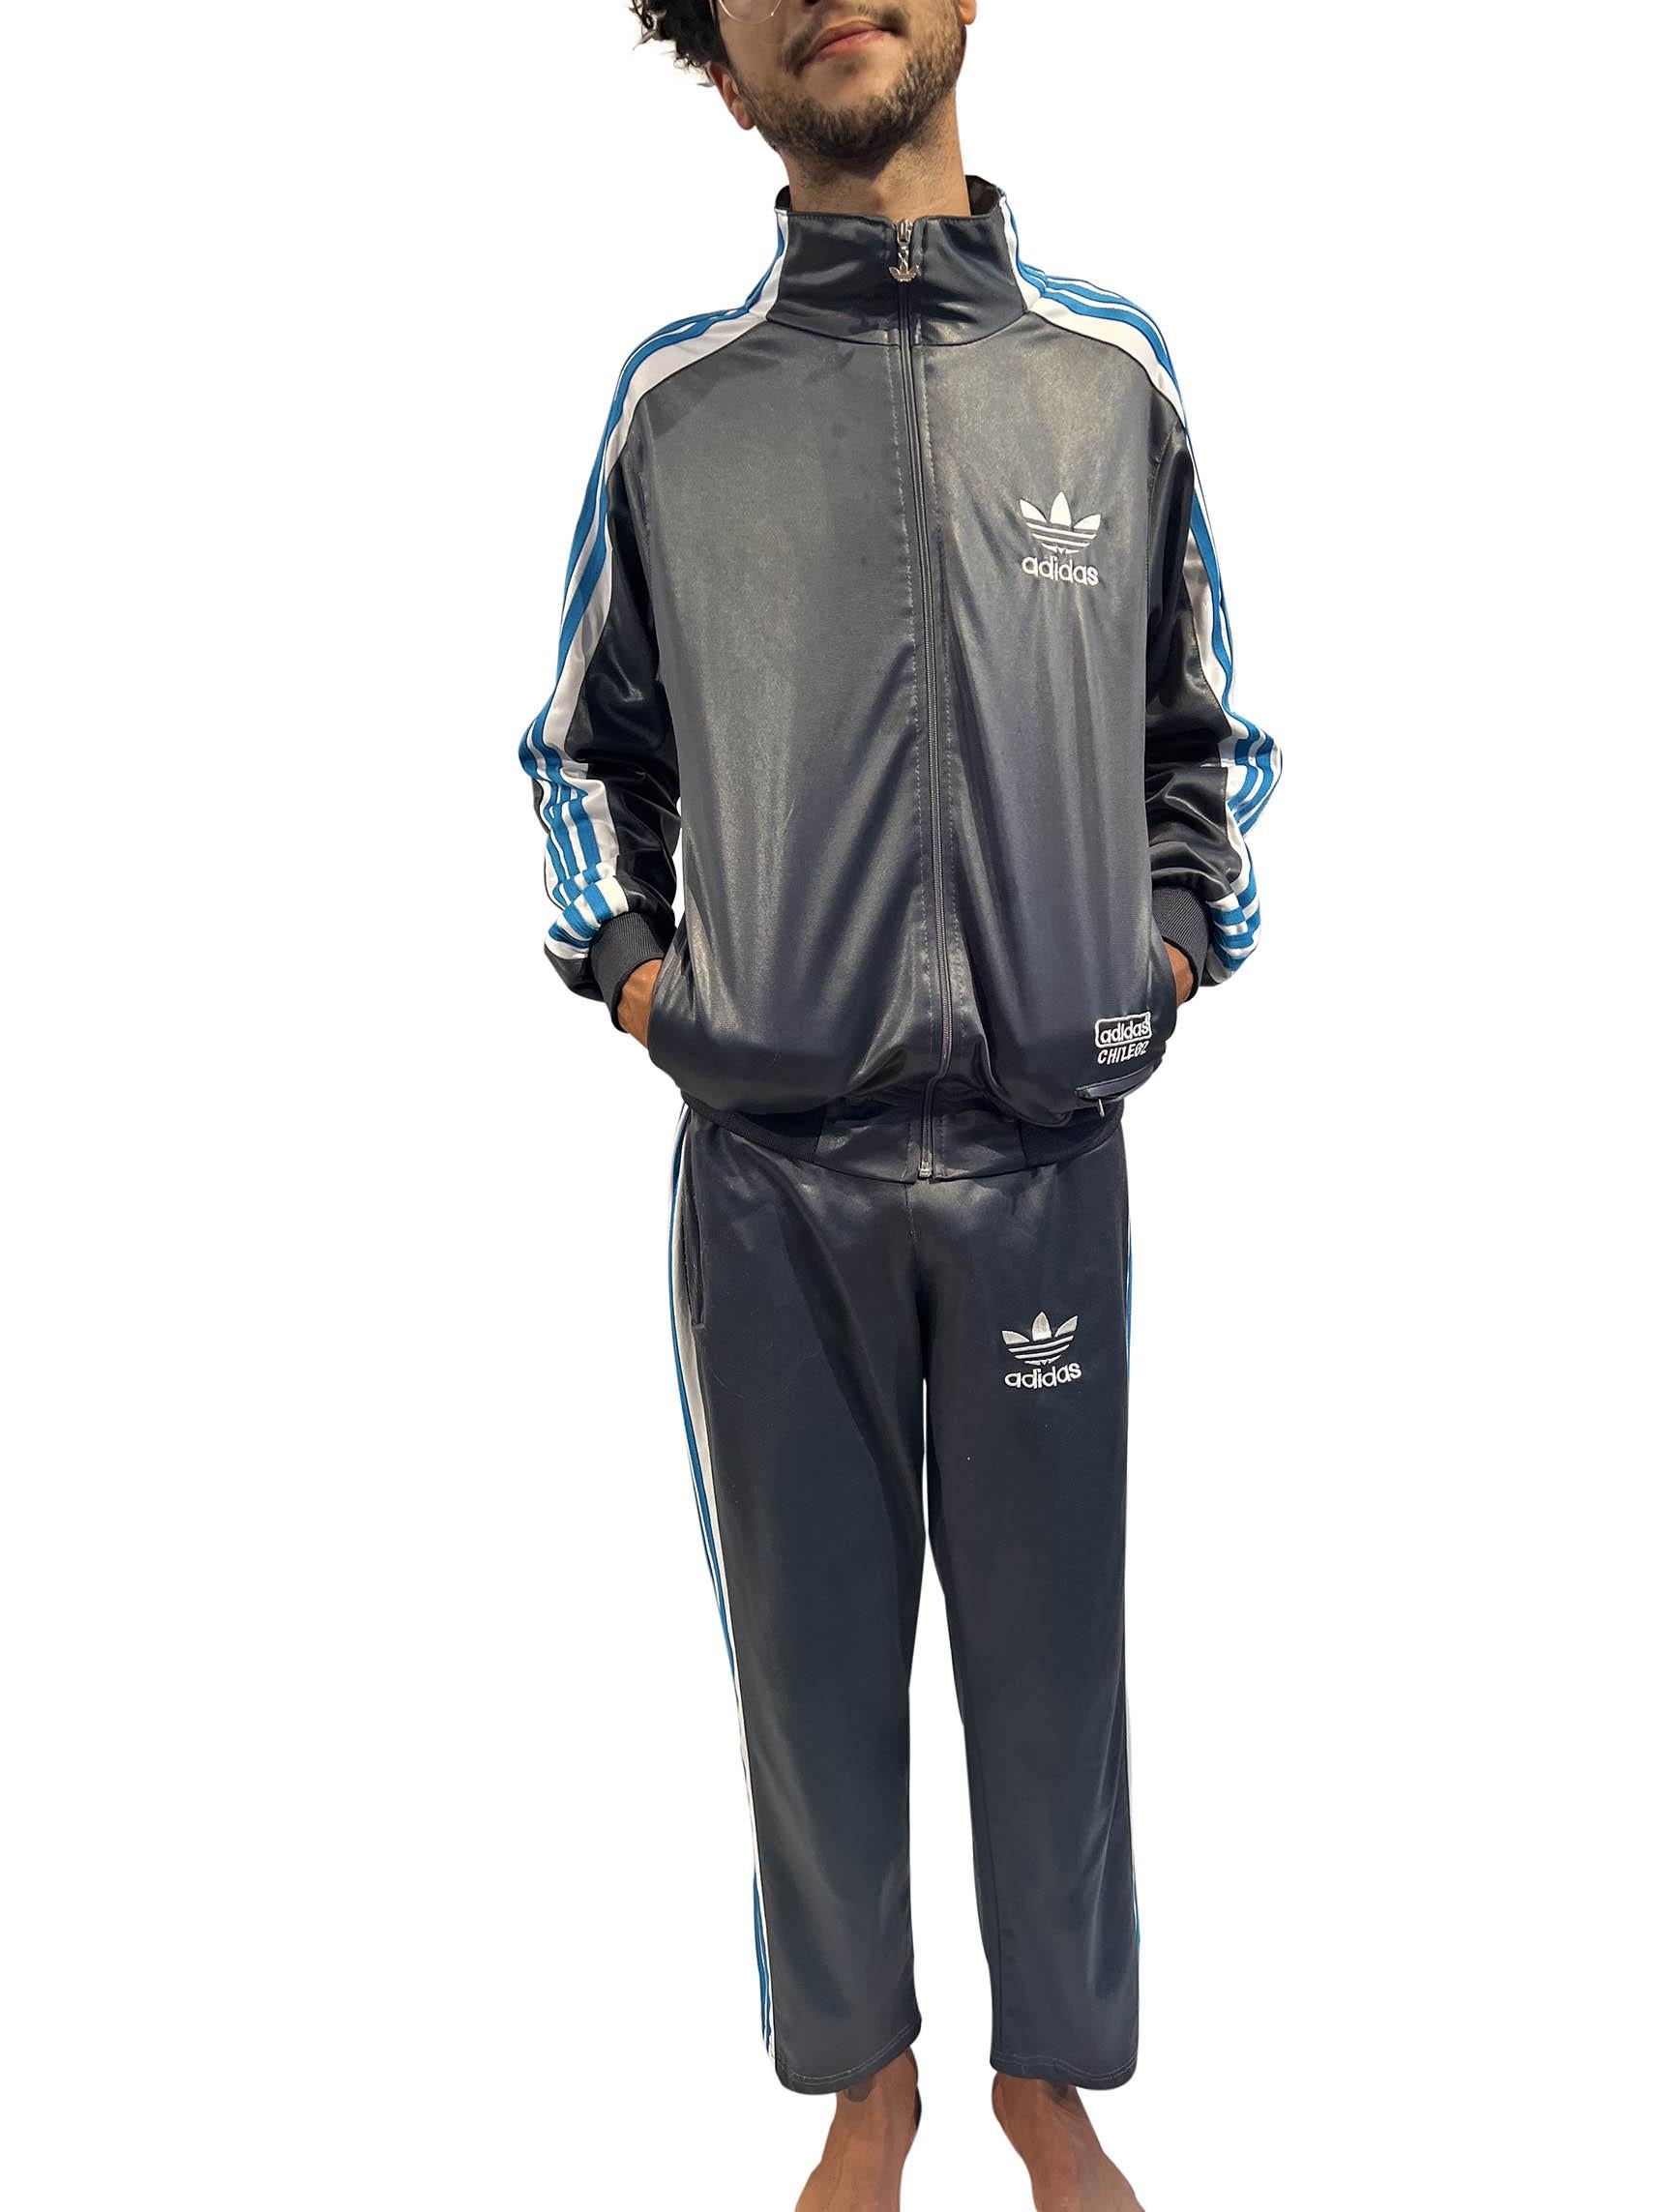 1980S Adidas Grey & Blue Polyester Stretchy Rare Chile 62' Pant Suit For Sale 1